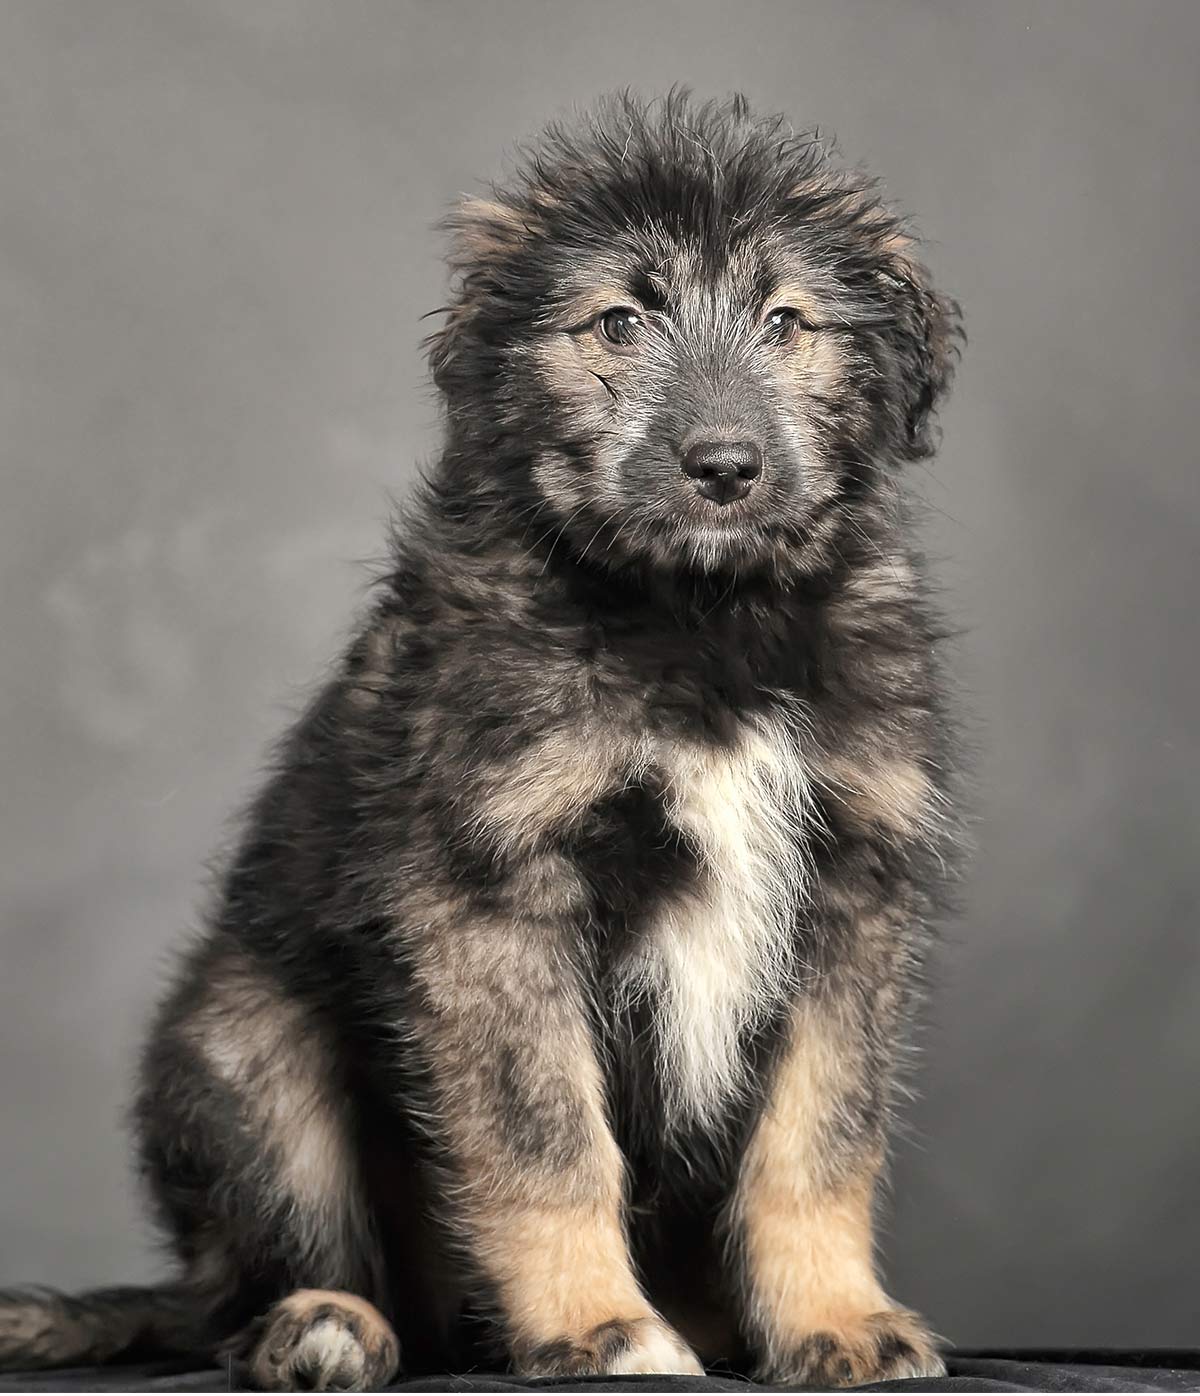 Russian Bear Dog A Complete Guide To The Caucasian Shepherd